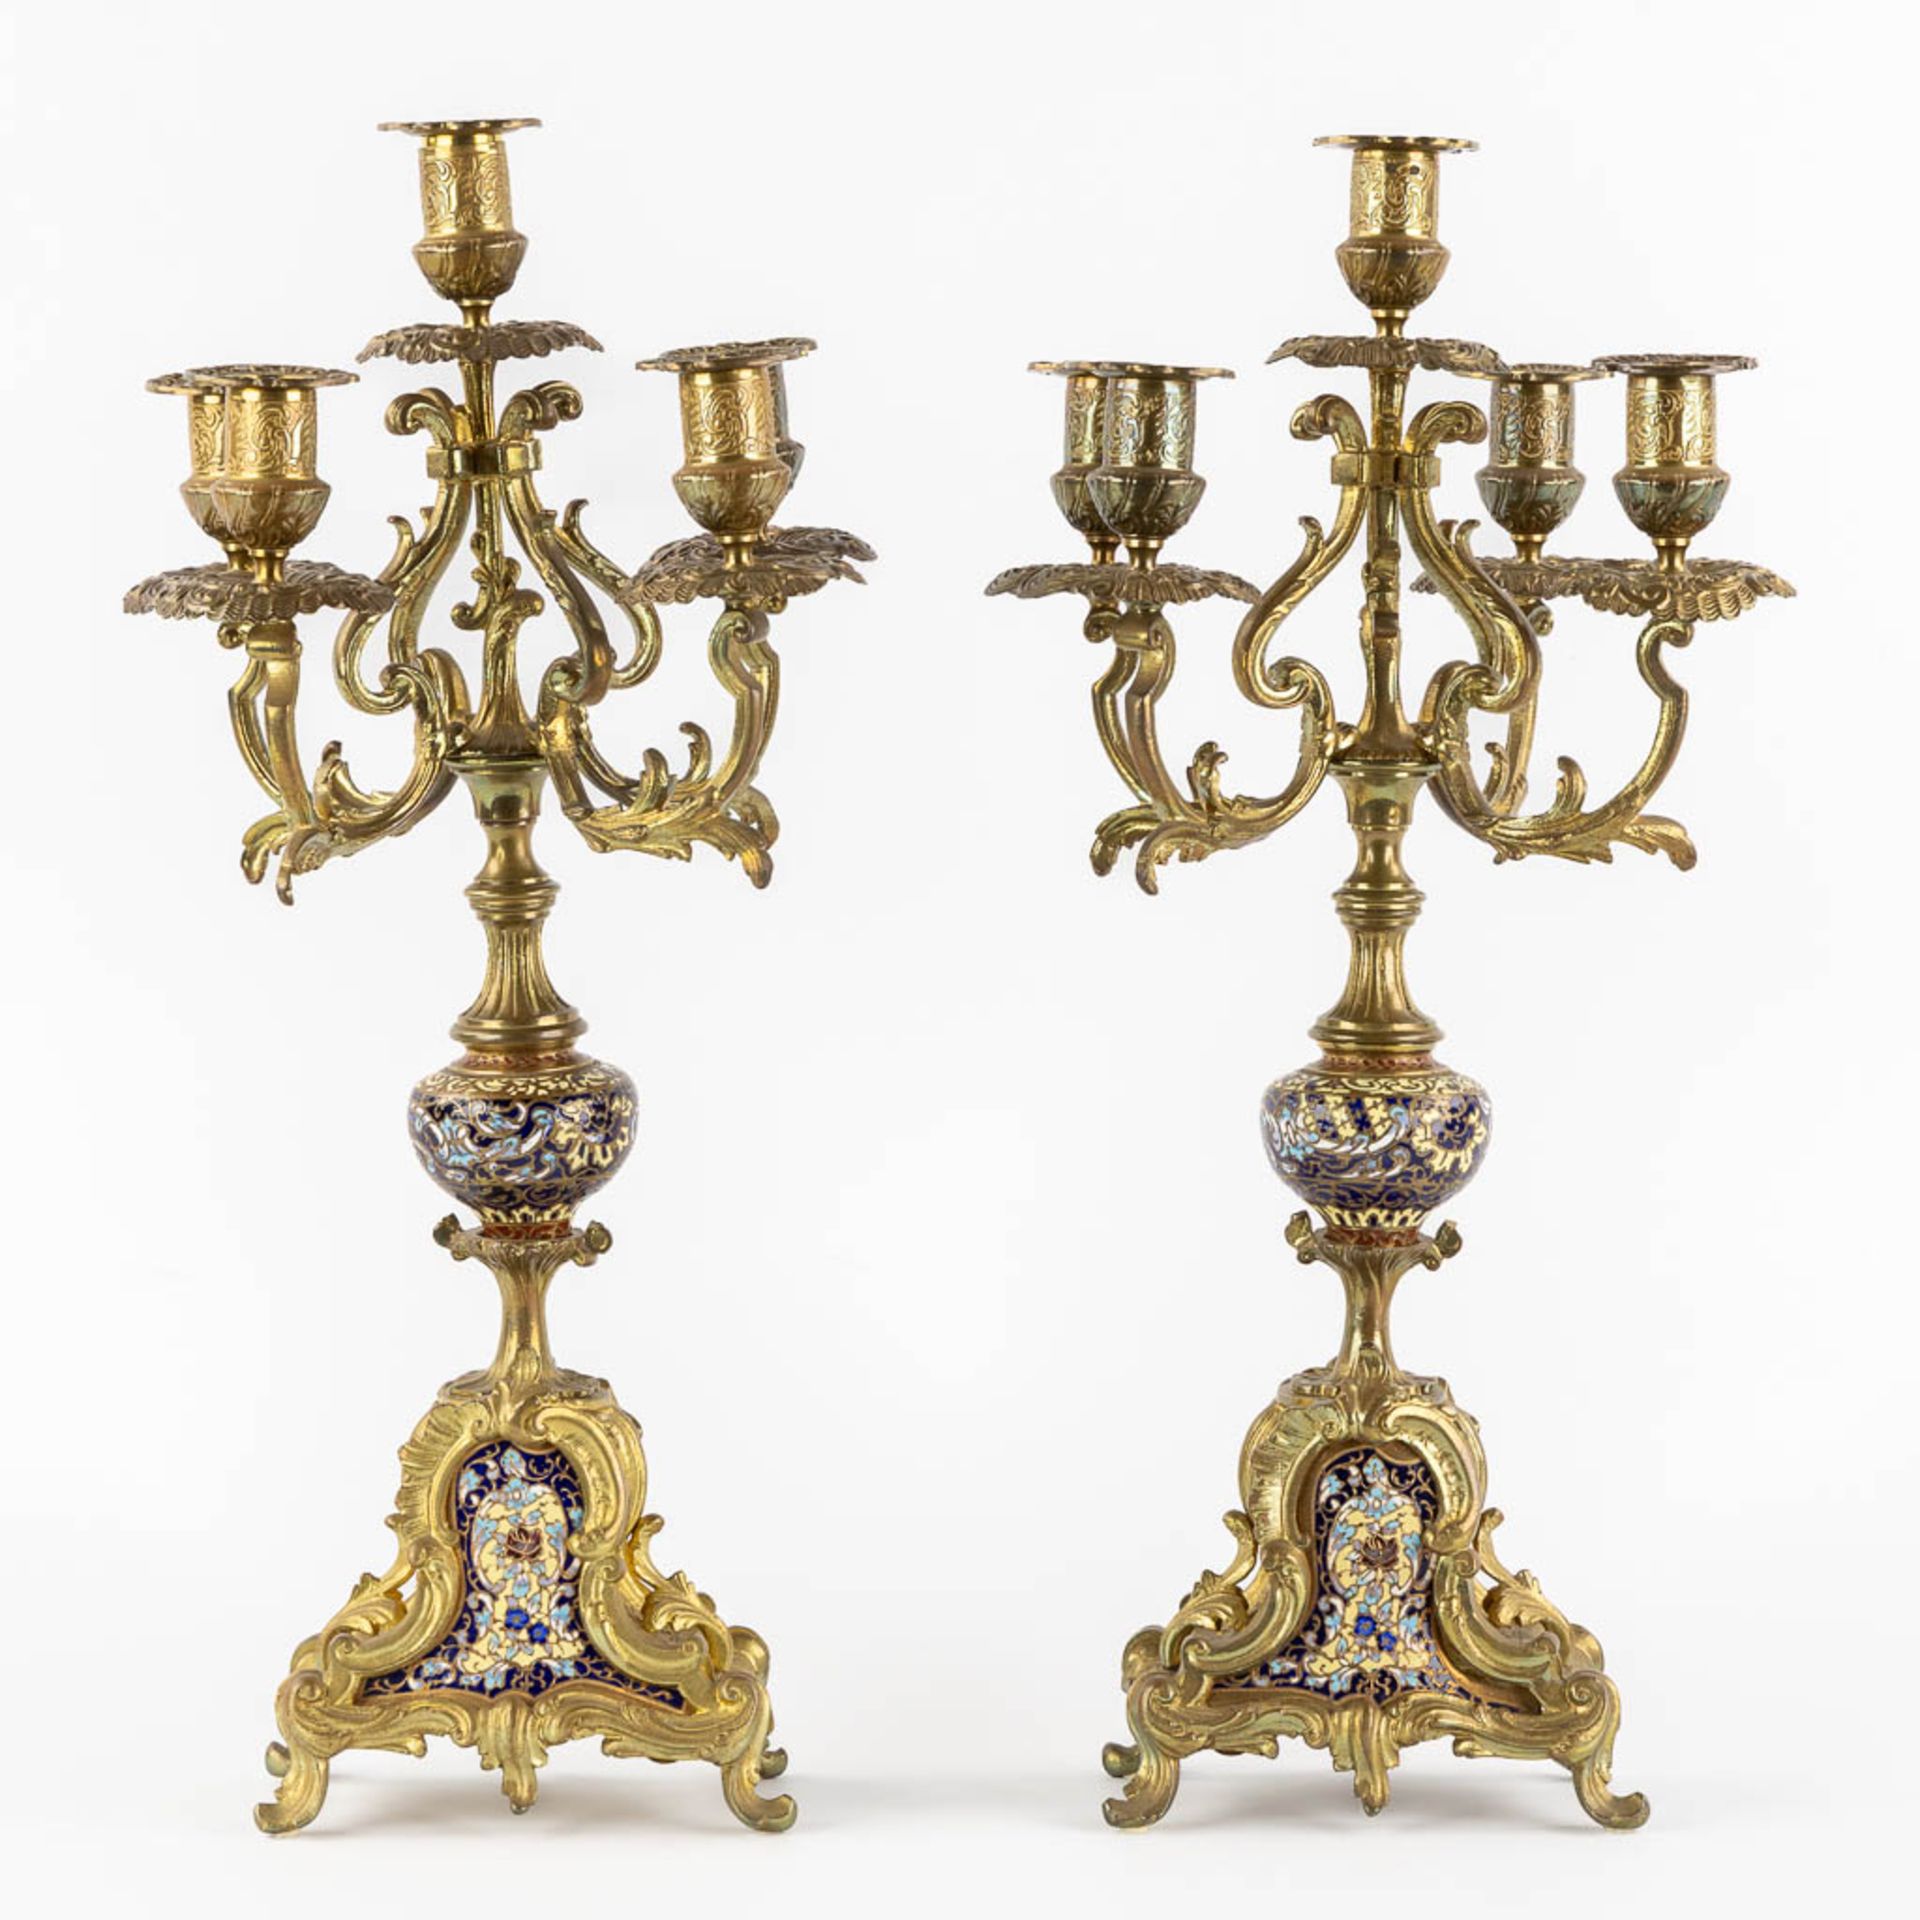 Two pairs of candelabra, bronze and cloisonné, Empire and Louis XVI style. (H:49 x D:26 cm) - Bild 3 aus 18